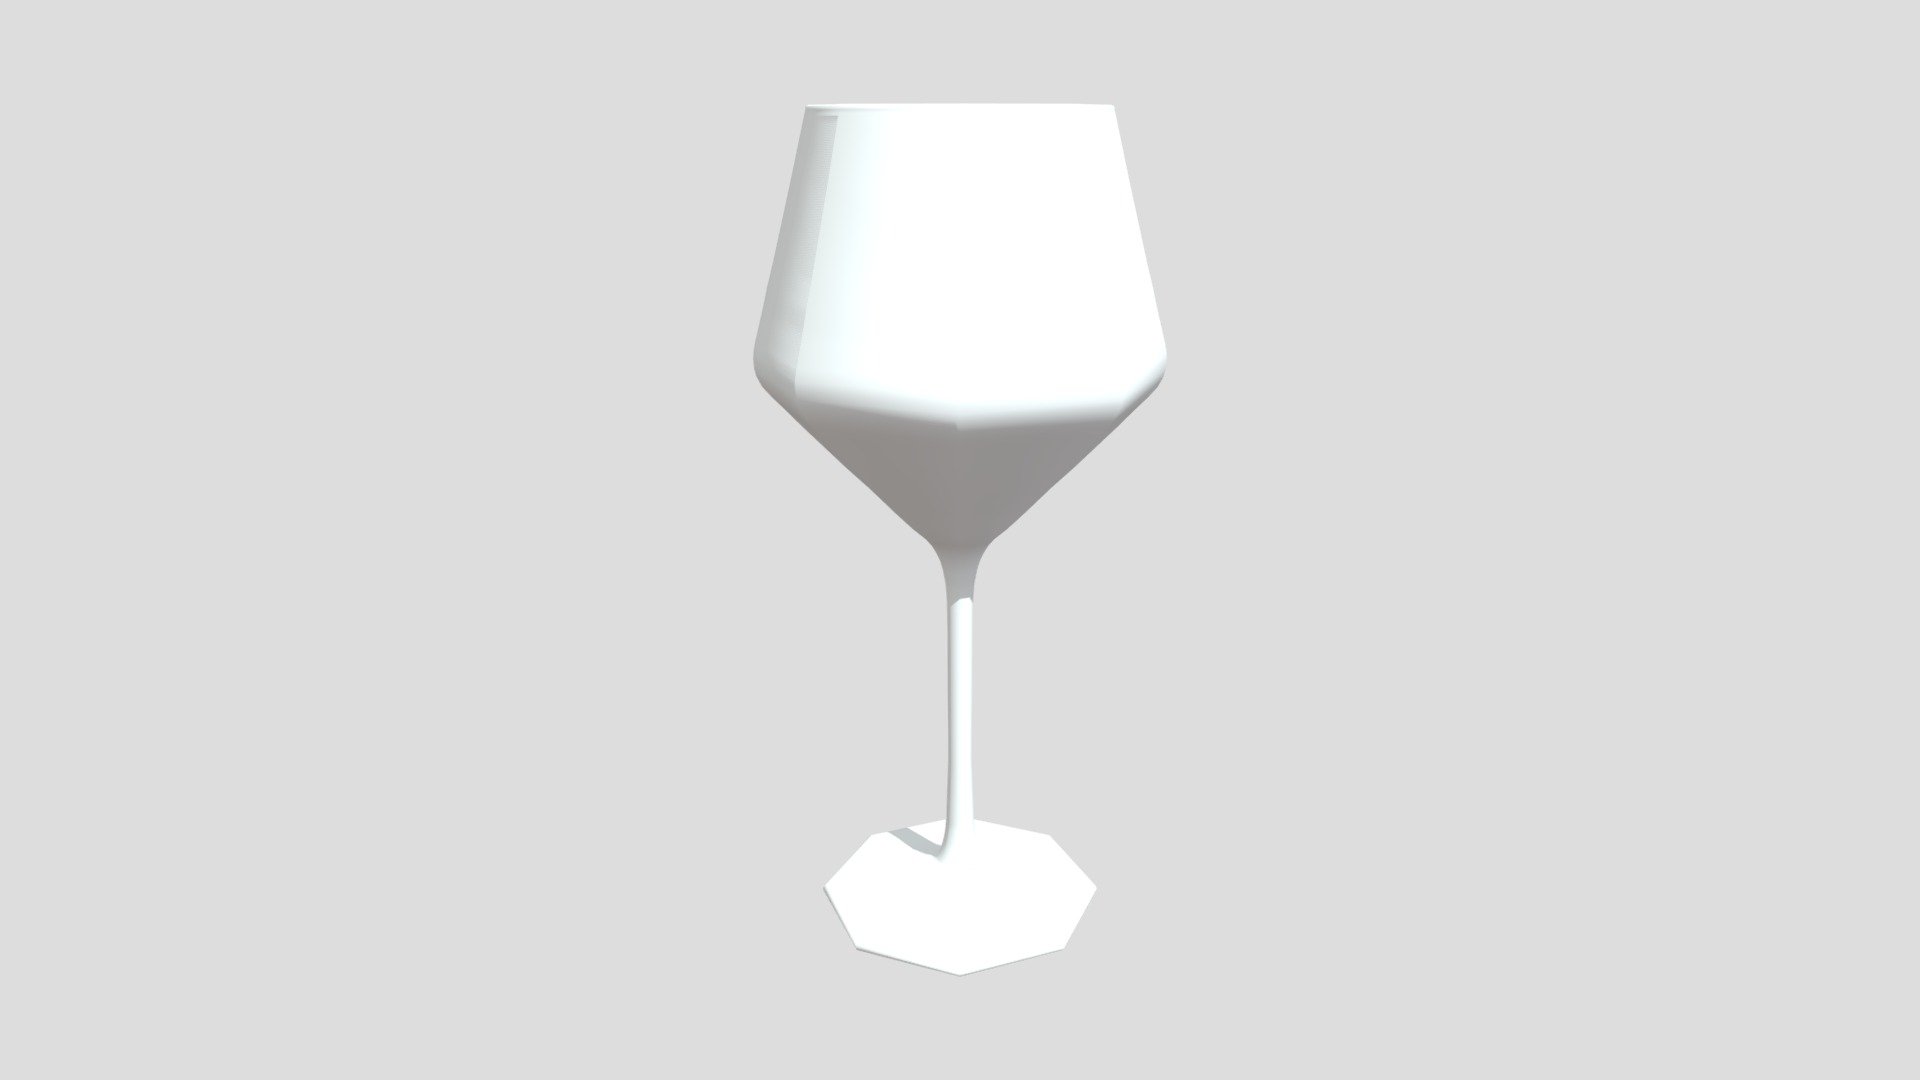 Low poly glass of wine - glass of wine - 3D model by blancasan 3d model